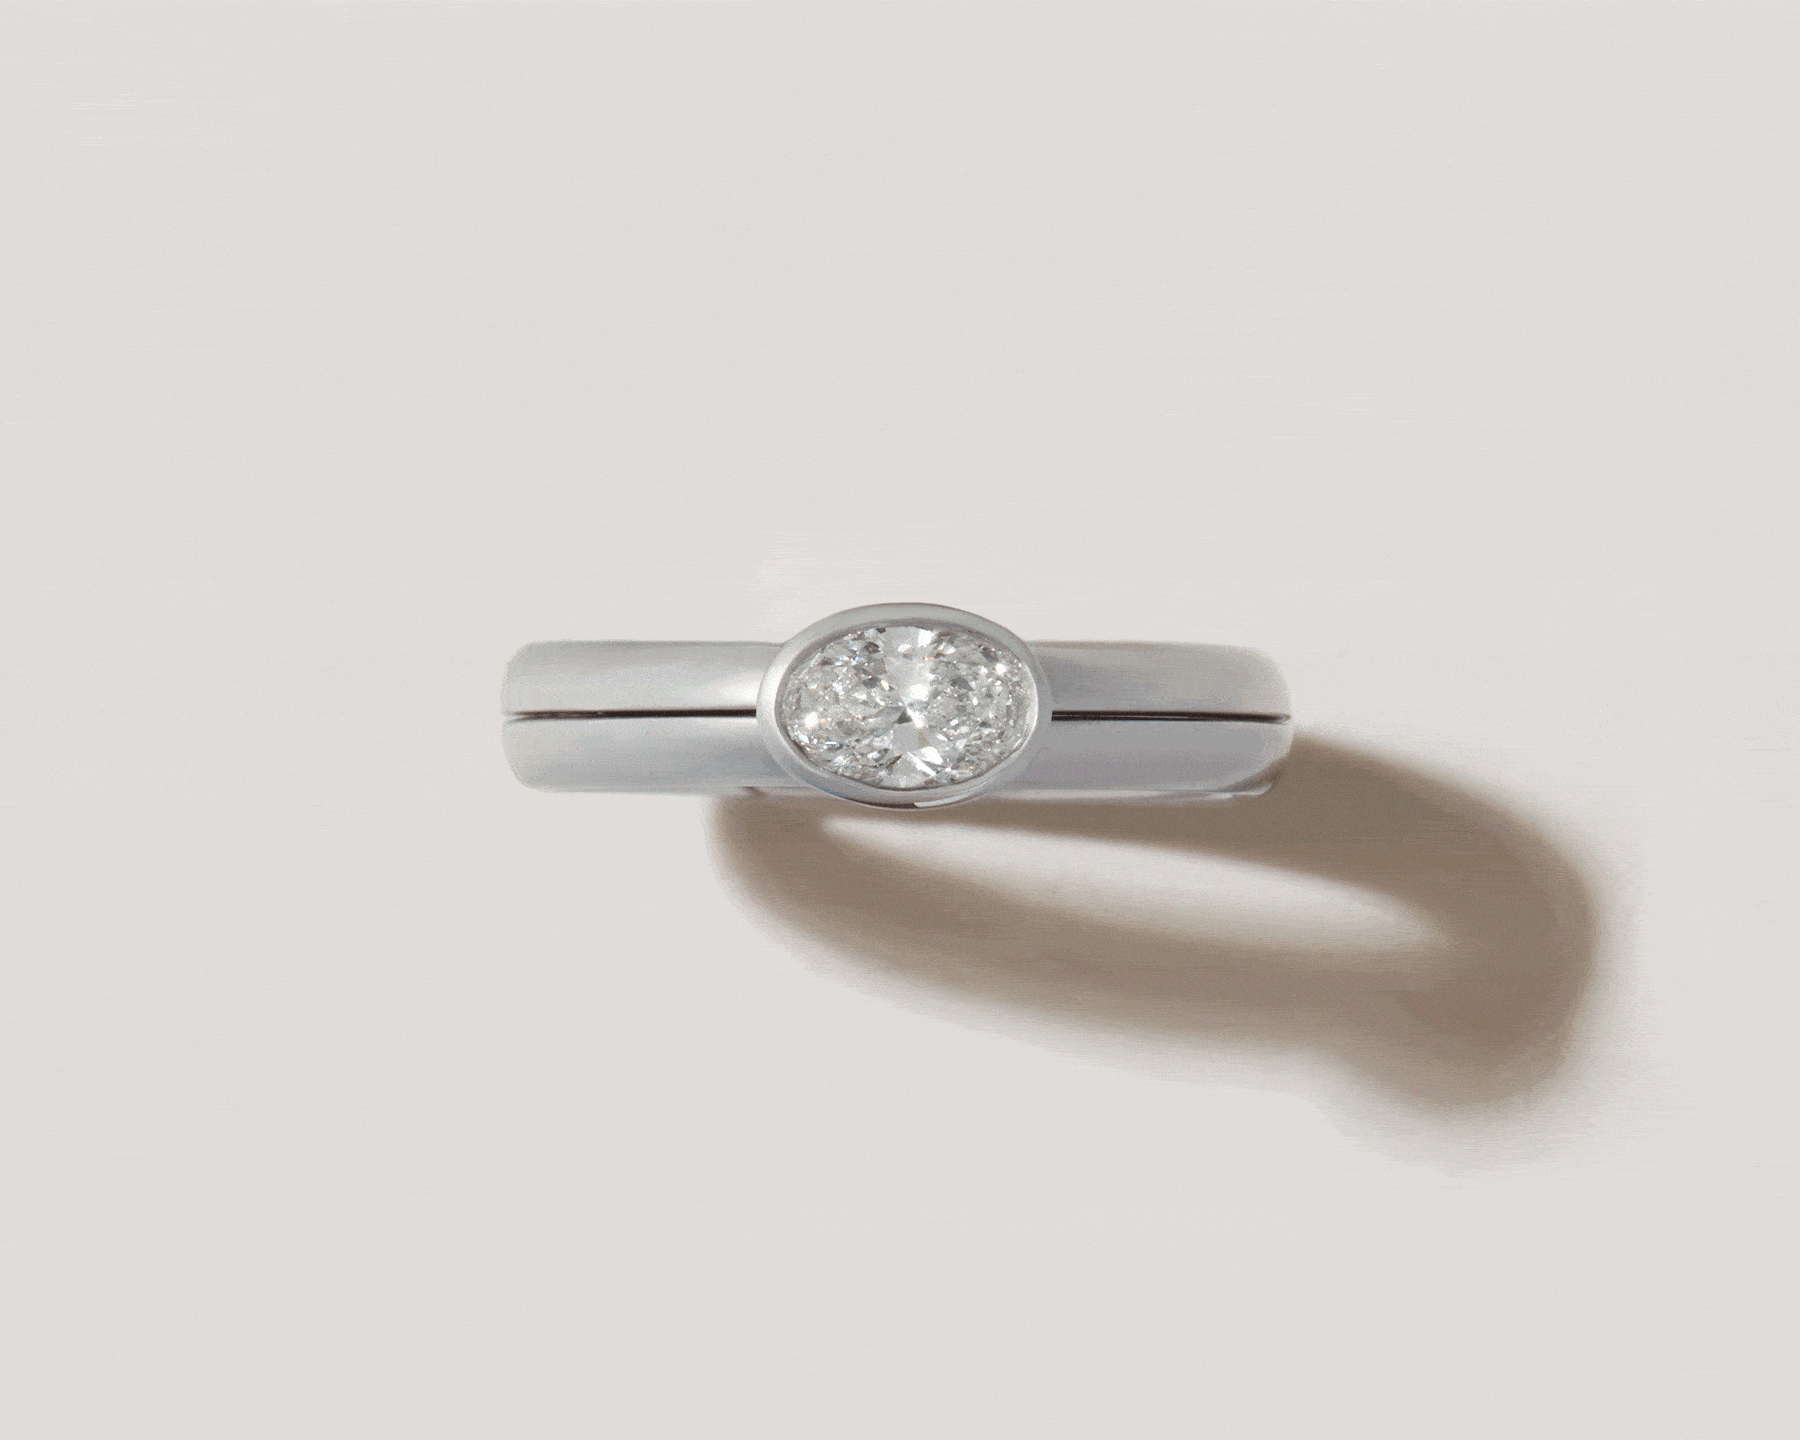 Marla Aaron’s ‘DiMe Siempre’ ring with its ingenious bezel-set diamond doubling as the clasp.